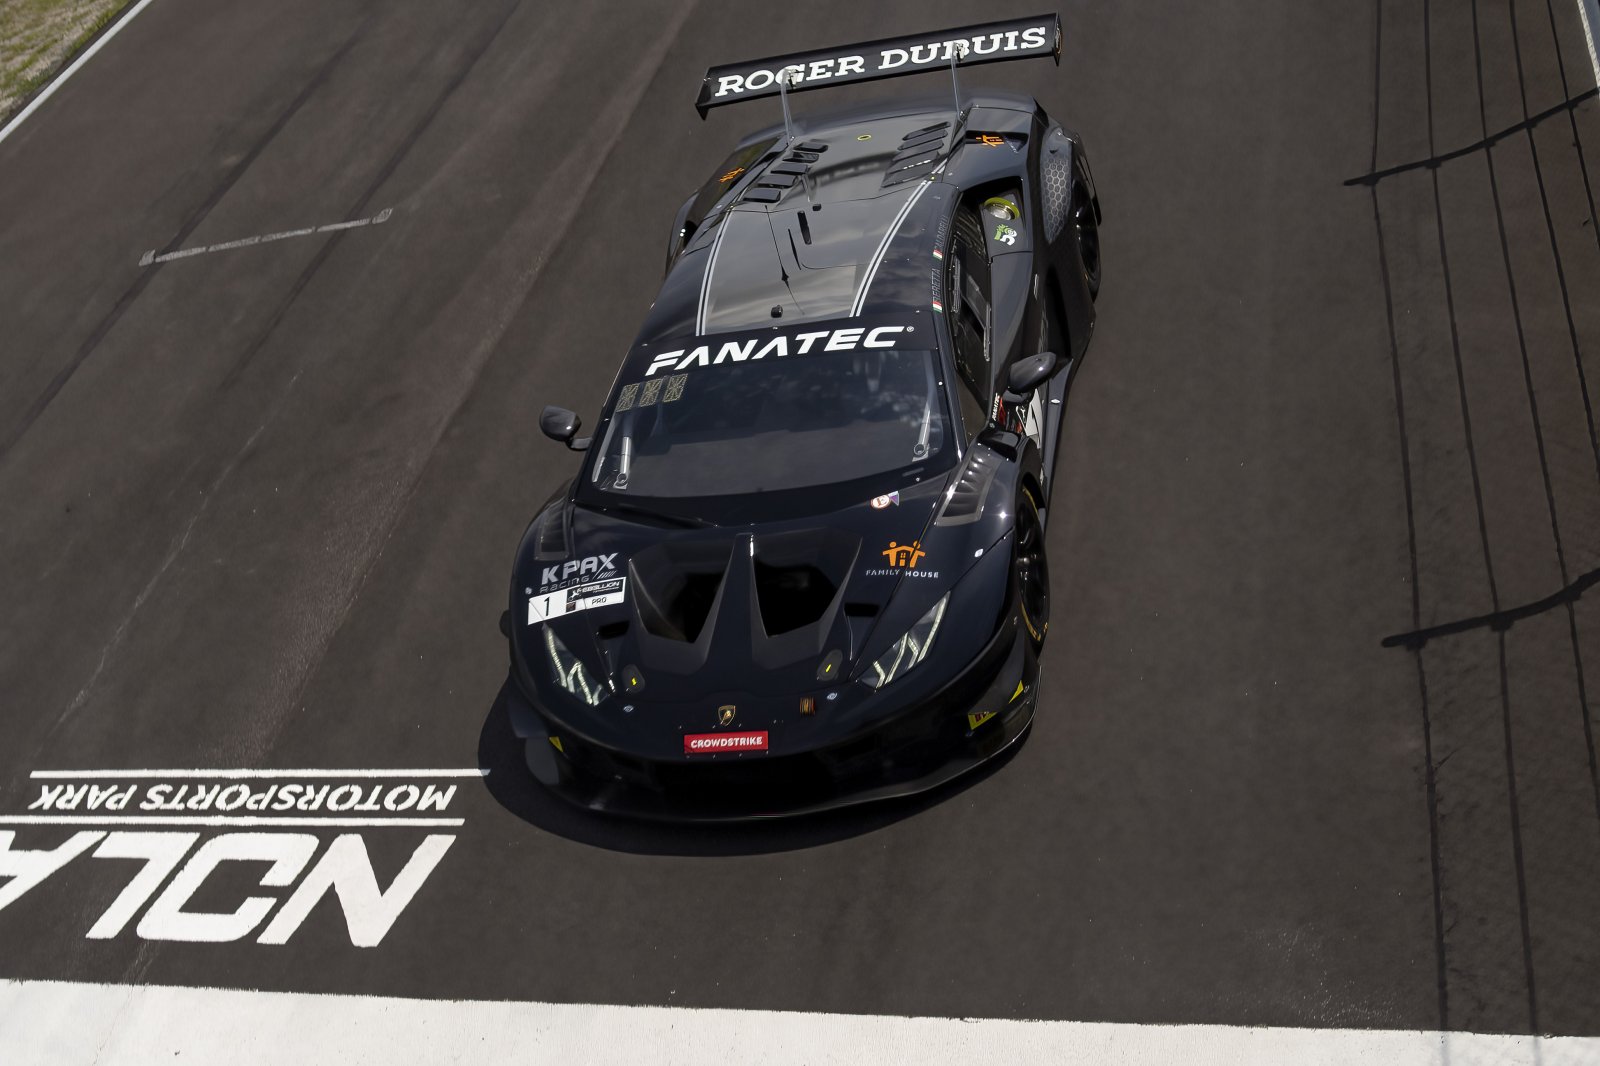 K-PAX Leads Overall in GT World America Practice Session 1 at NOLA